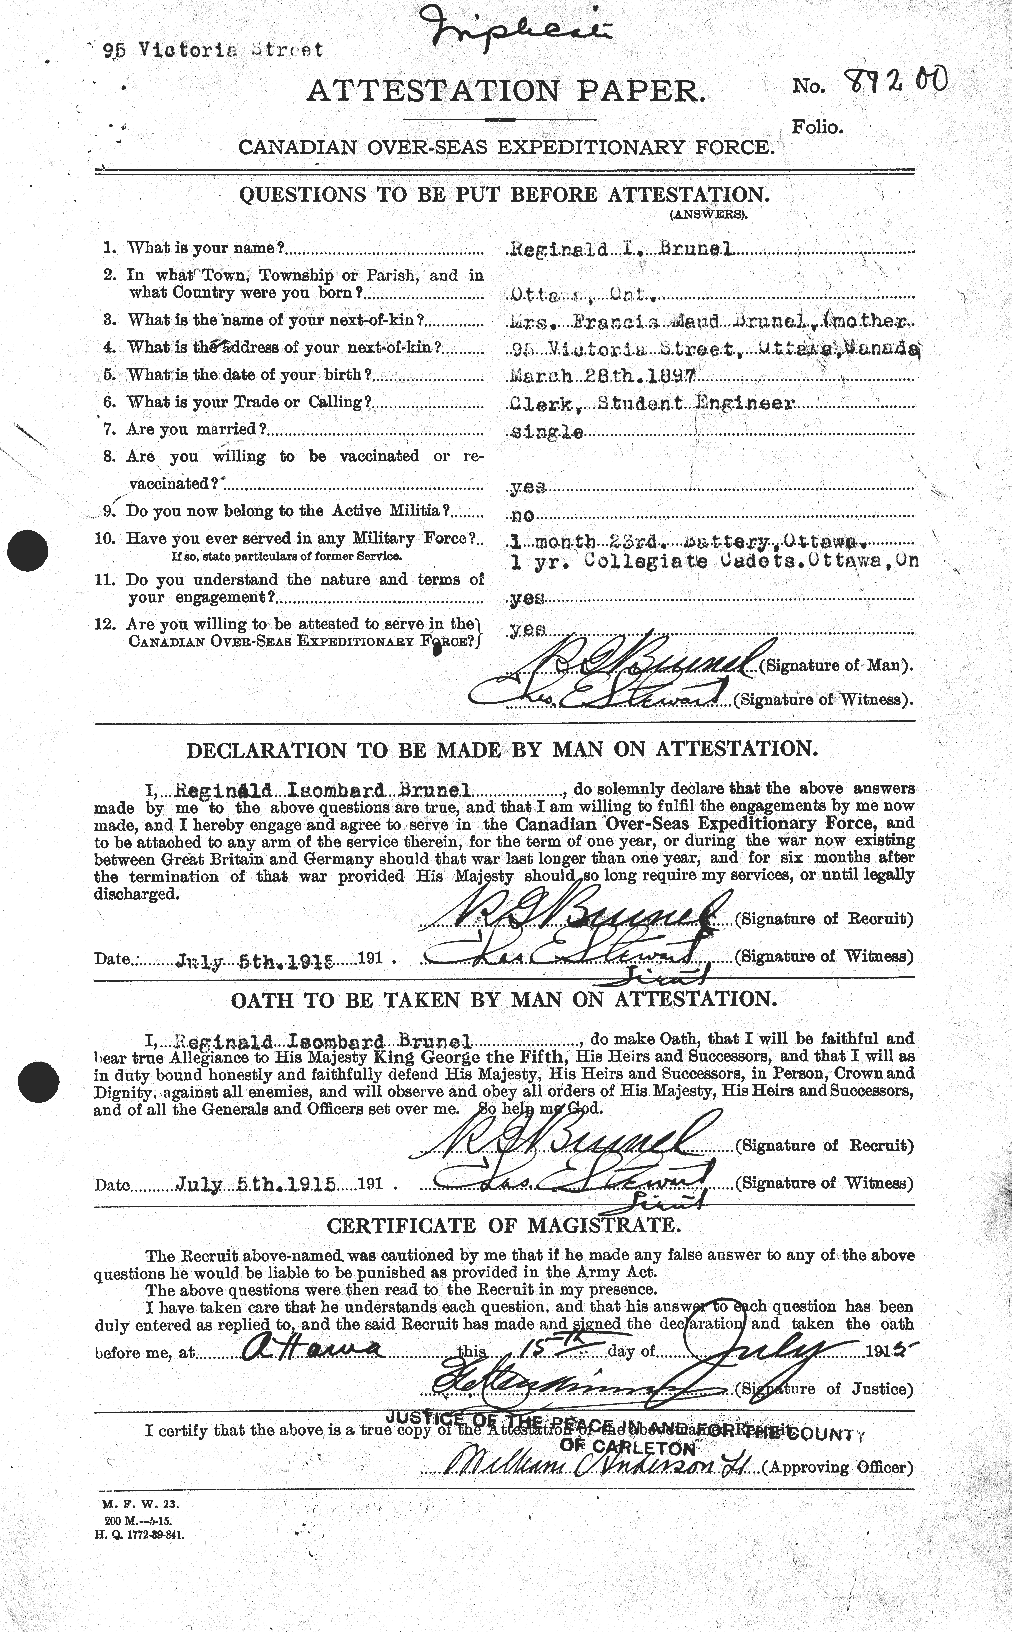 Personnel Records of the First World War - CEF 268337a